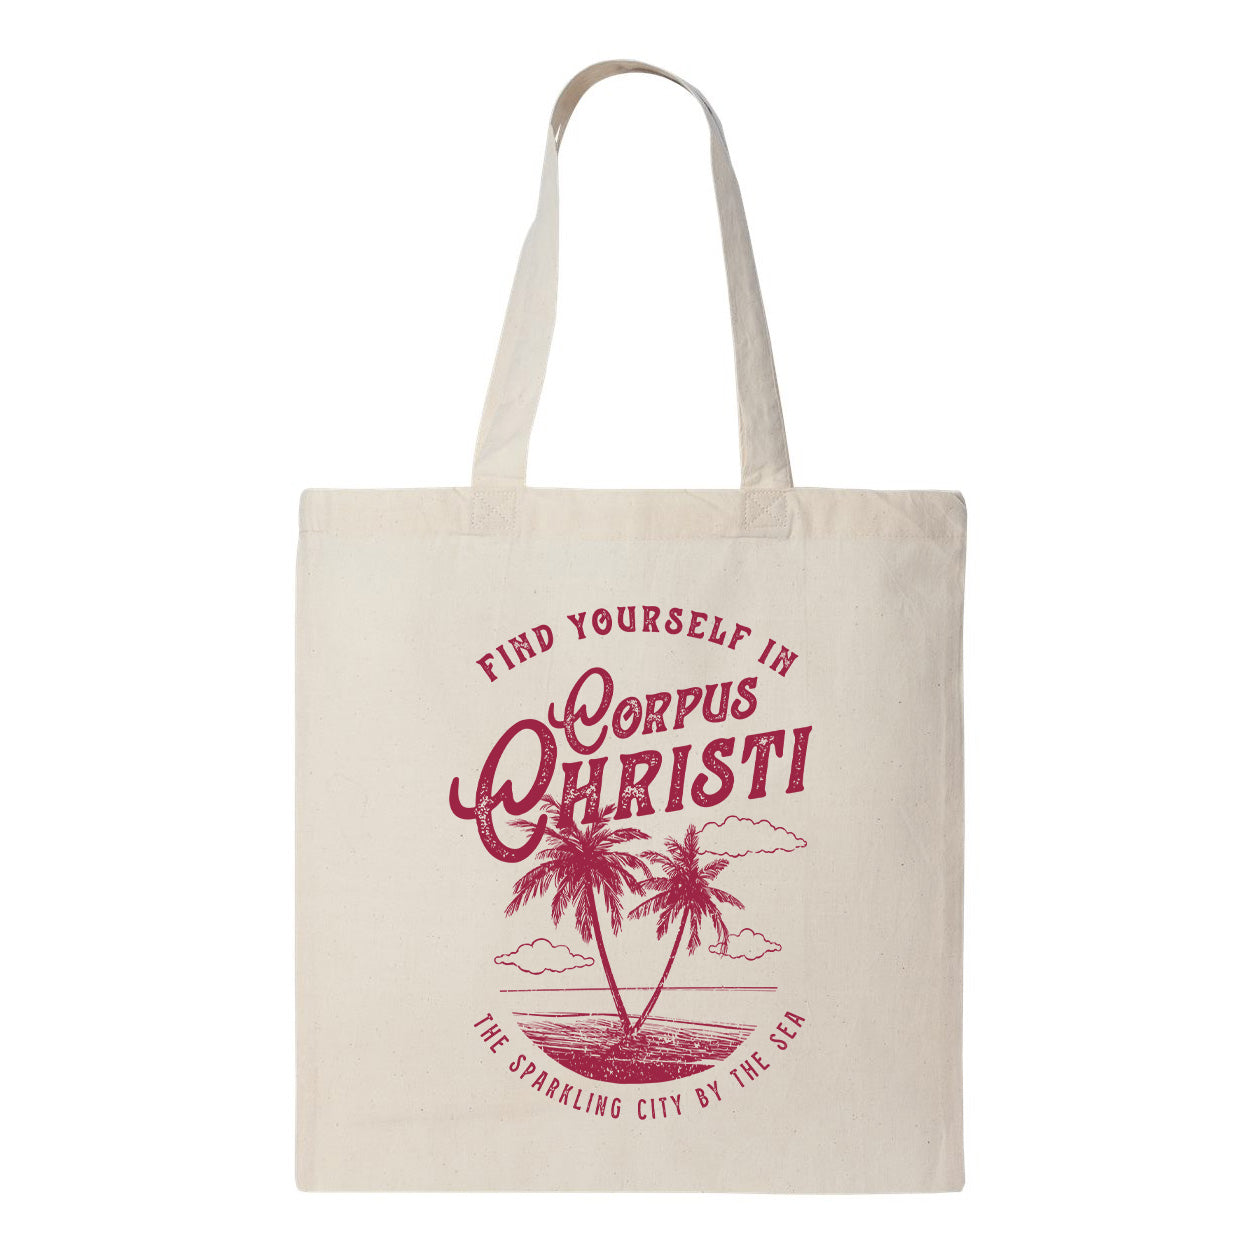 Find Yourself in CC Tote Bag